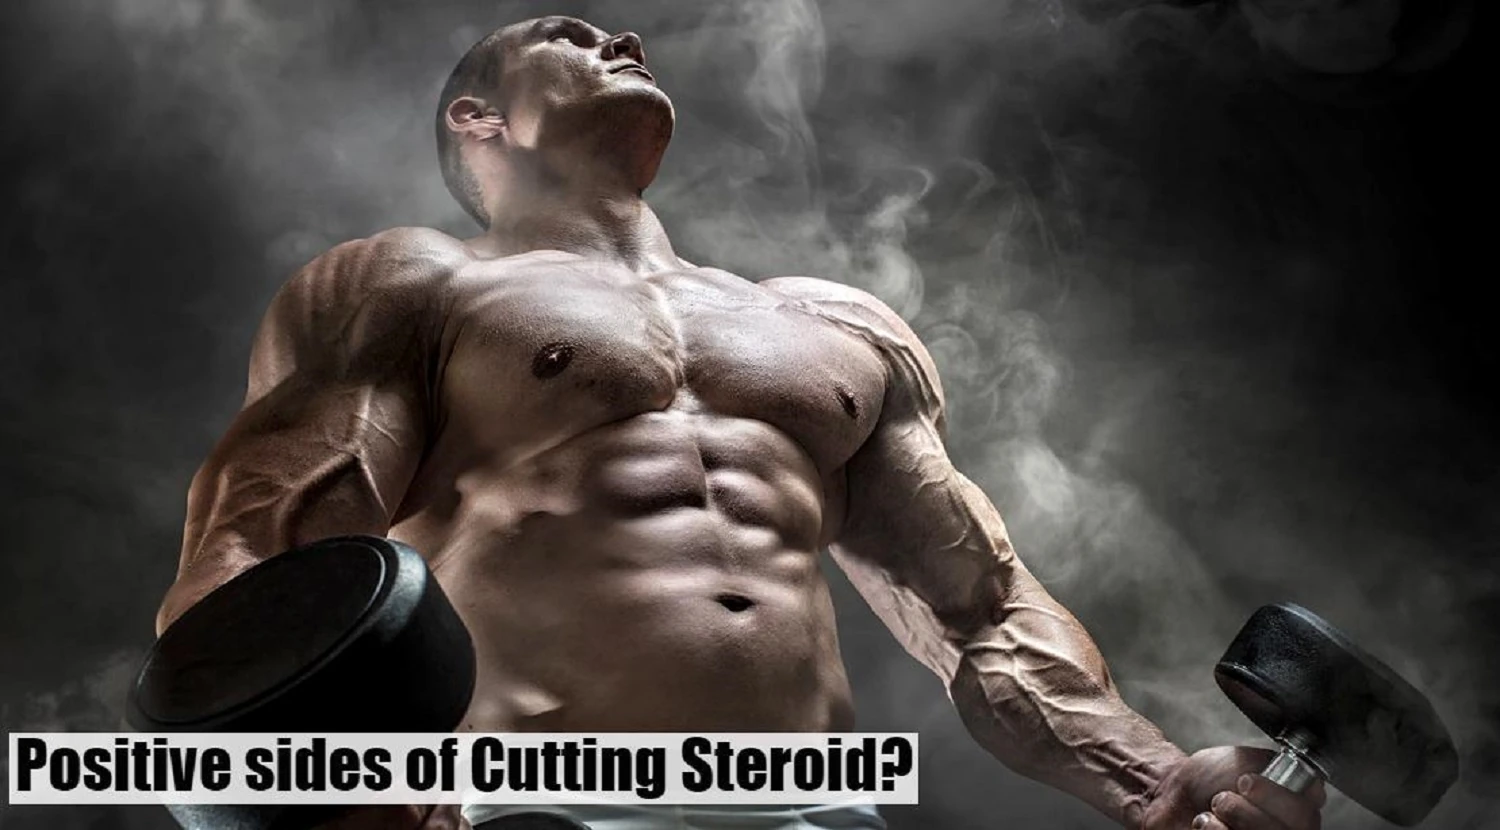 Cutting steroid positive sides